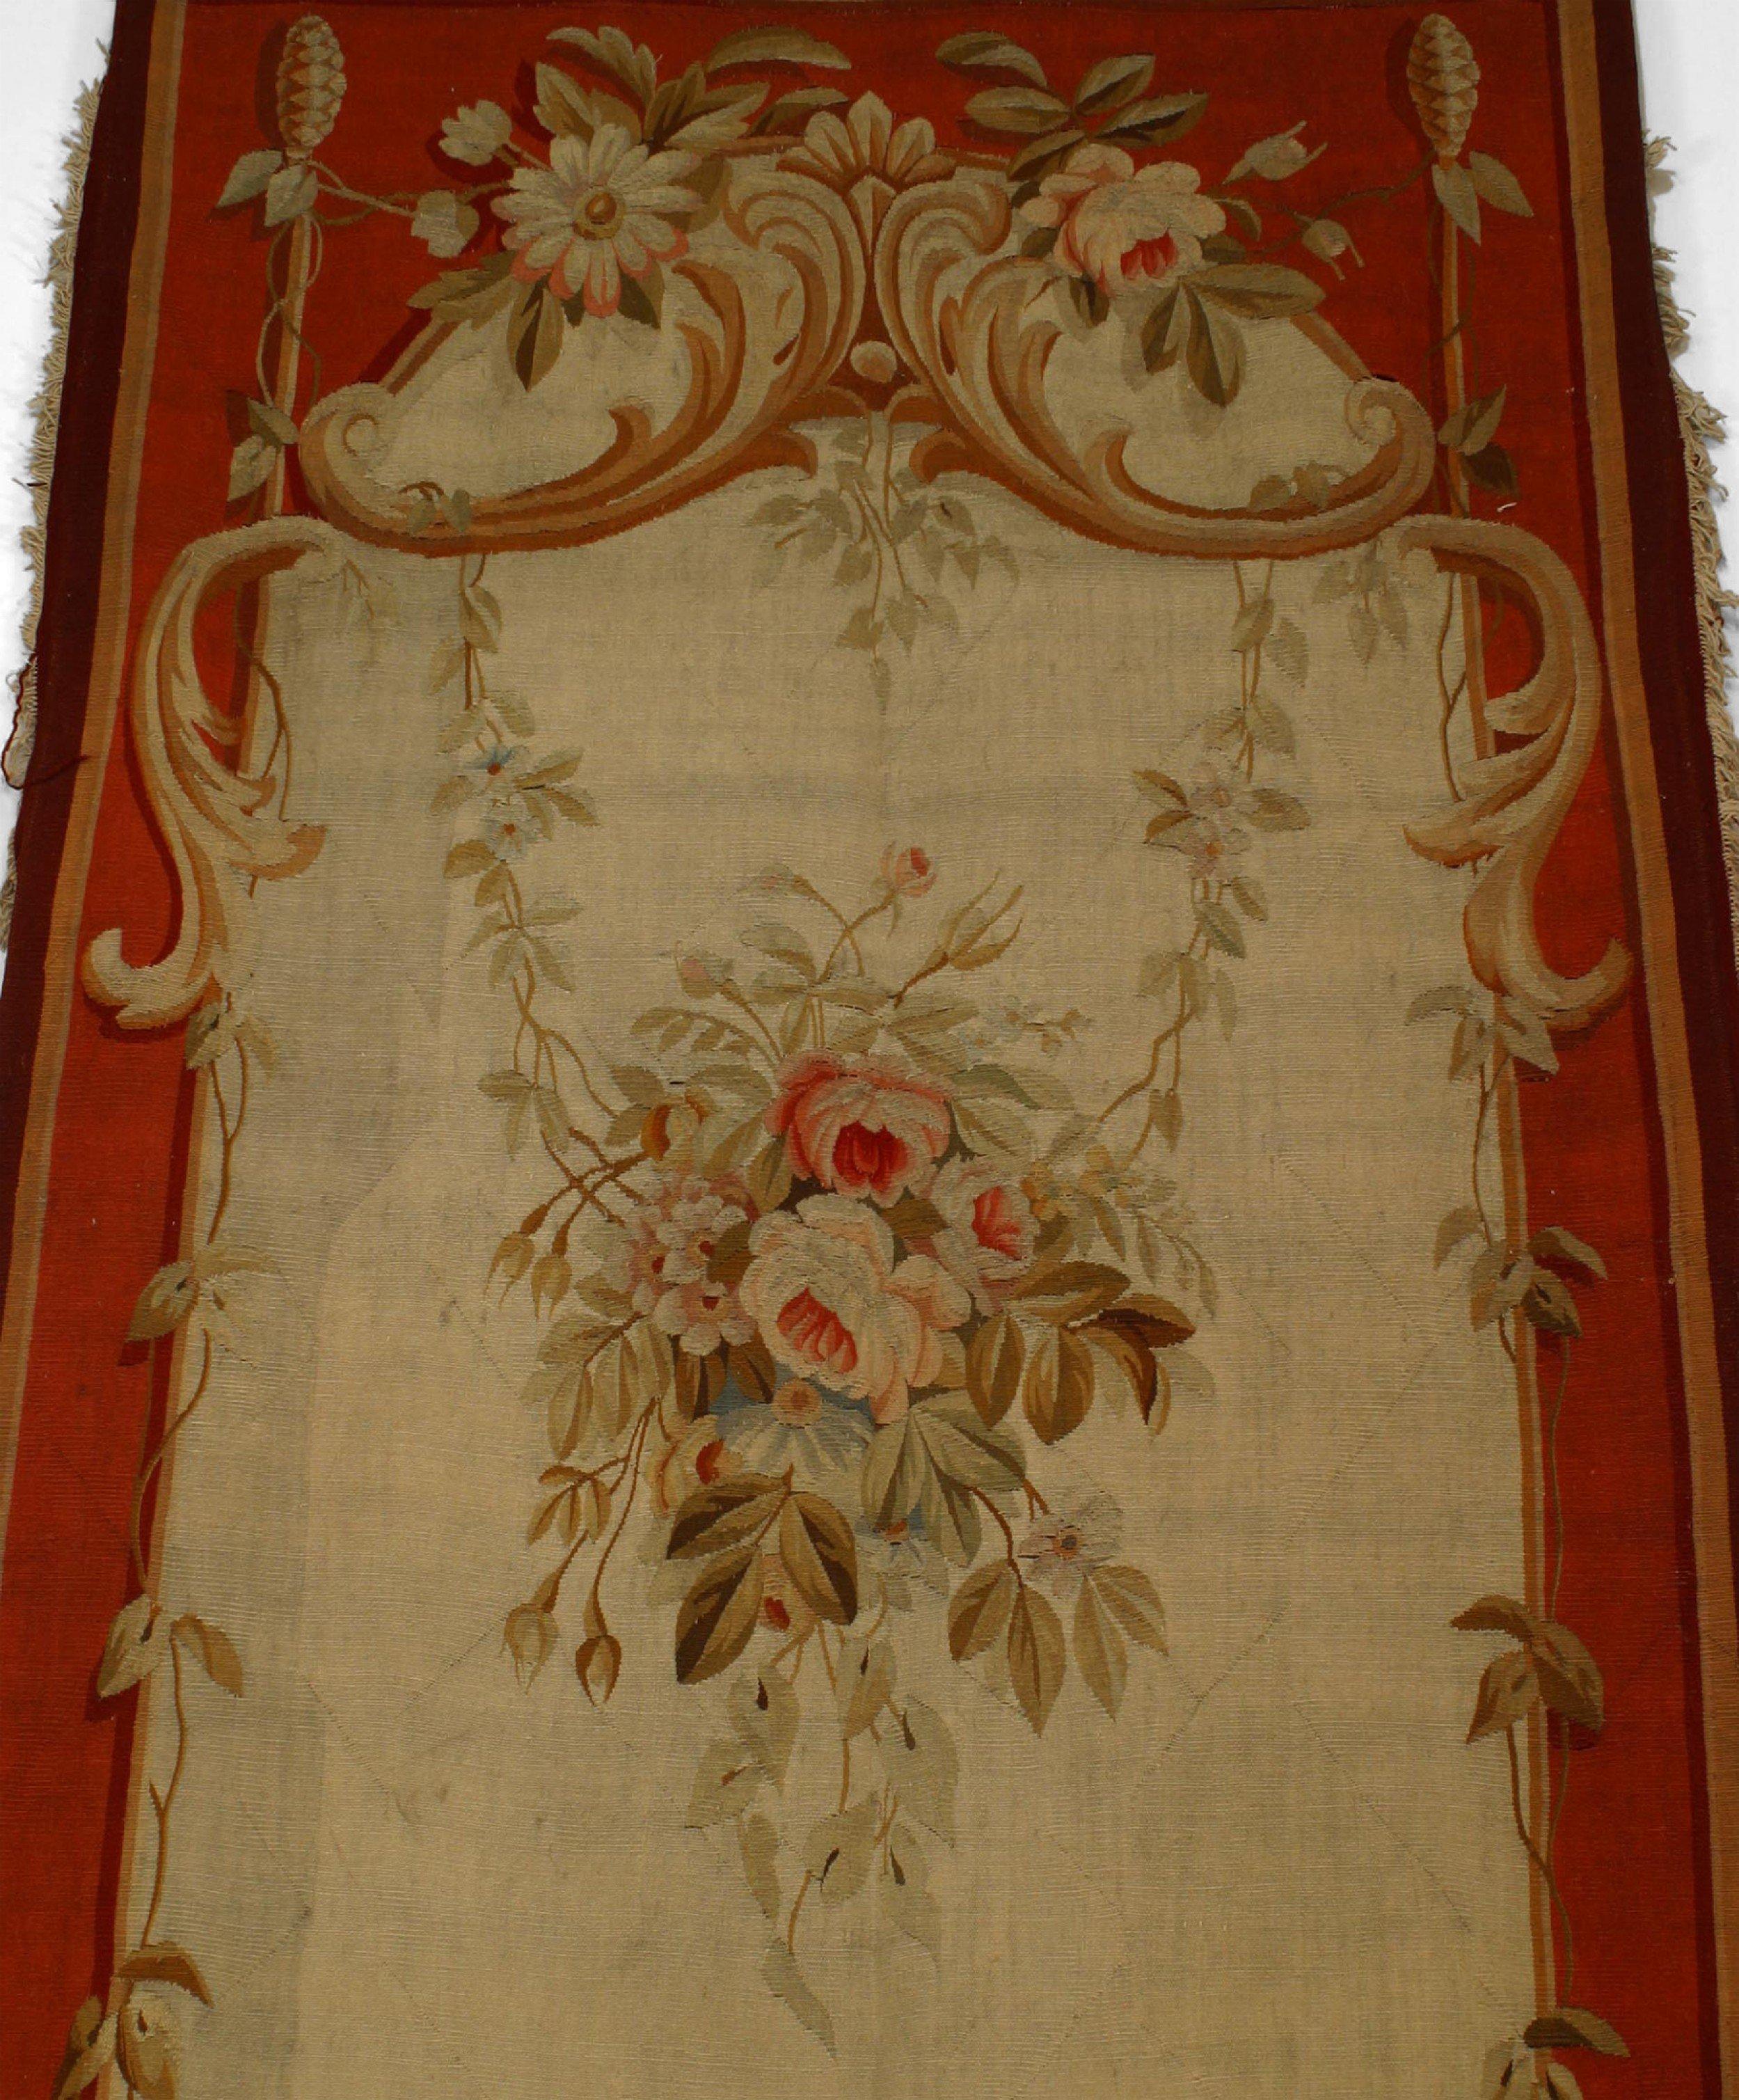 Pair of French Victorian (19th/20th Century) Aubusson wall hanging with floral design in beige, rose & maroon (priced as pair)
 